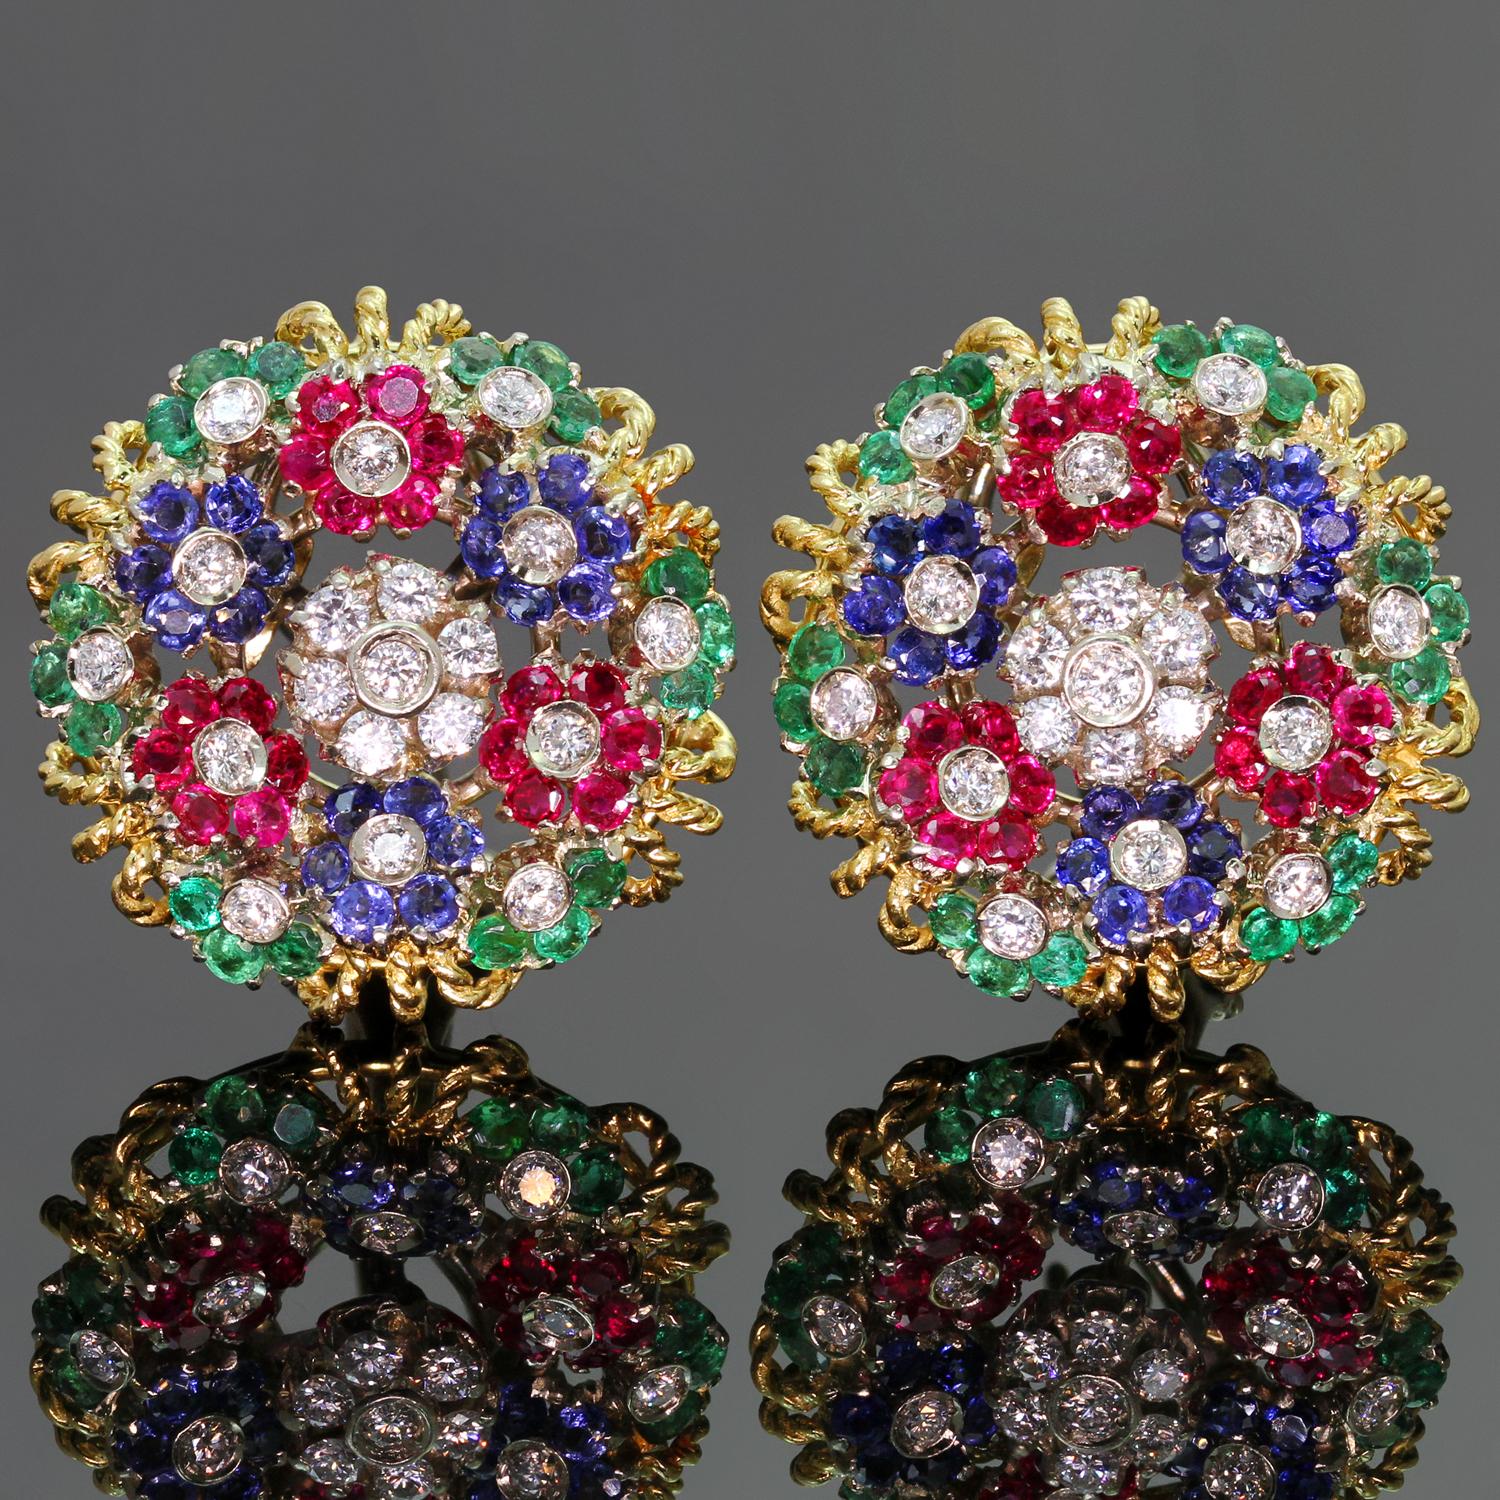 These stunningly vibrant lever-back round earrings are crafted by a fine Italian maker out of 18k yellow gold with white gold accents and beautifully accented with brilliant-cut diamonds, rubies, emeralds, and sapphires. The diamonds weigh an